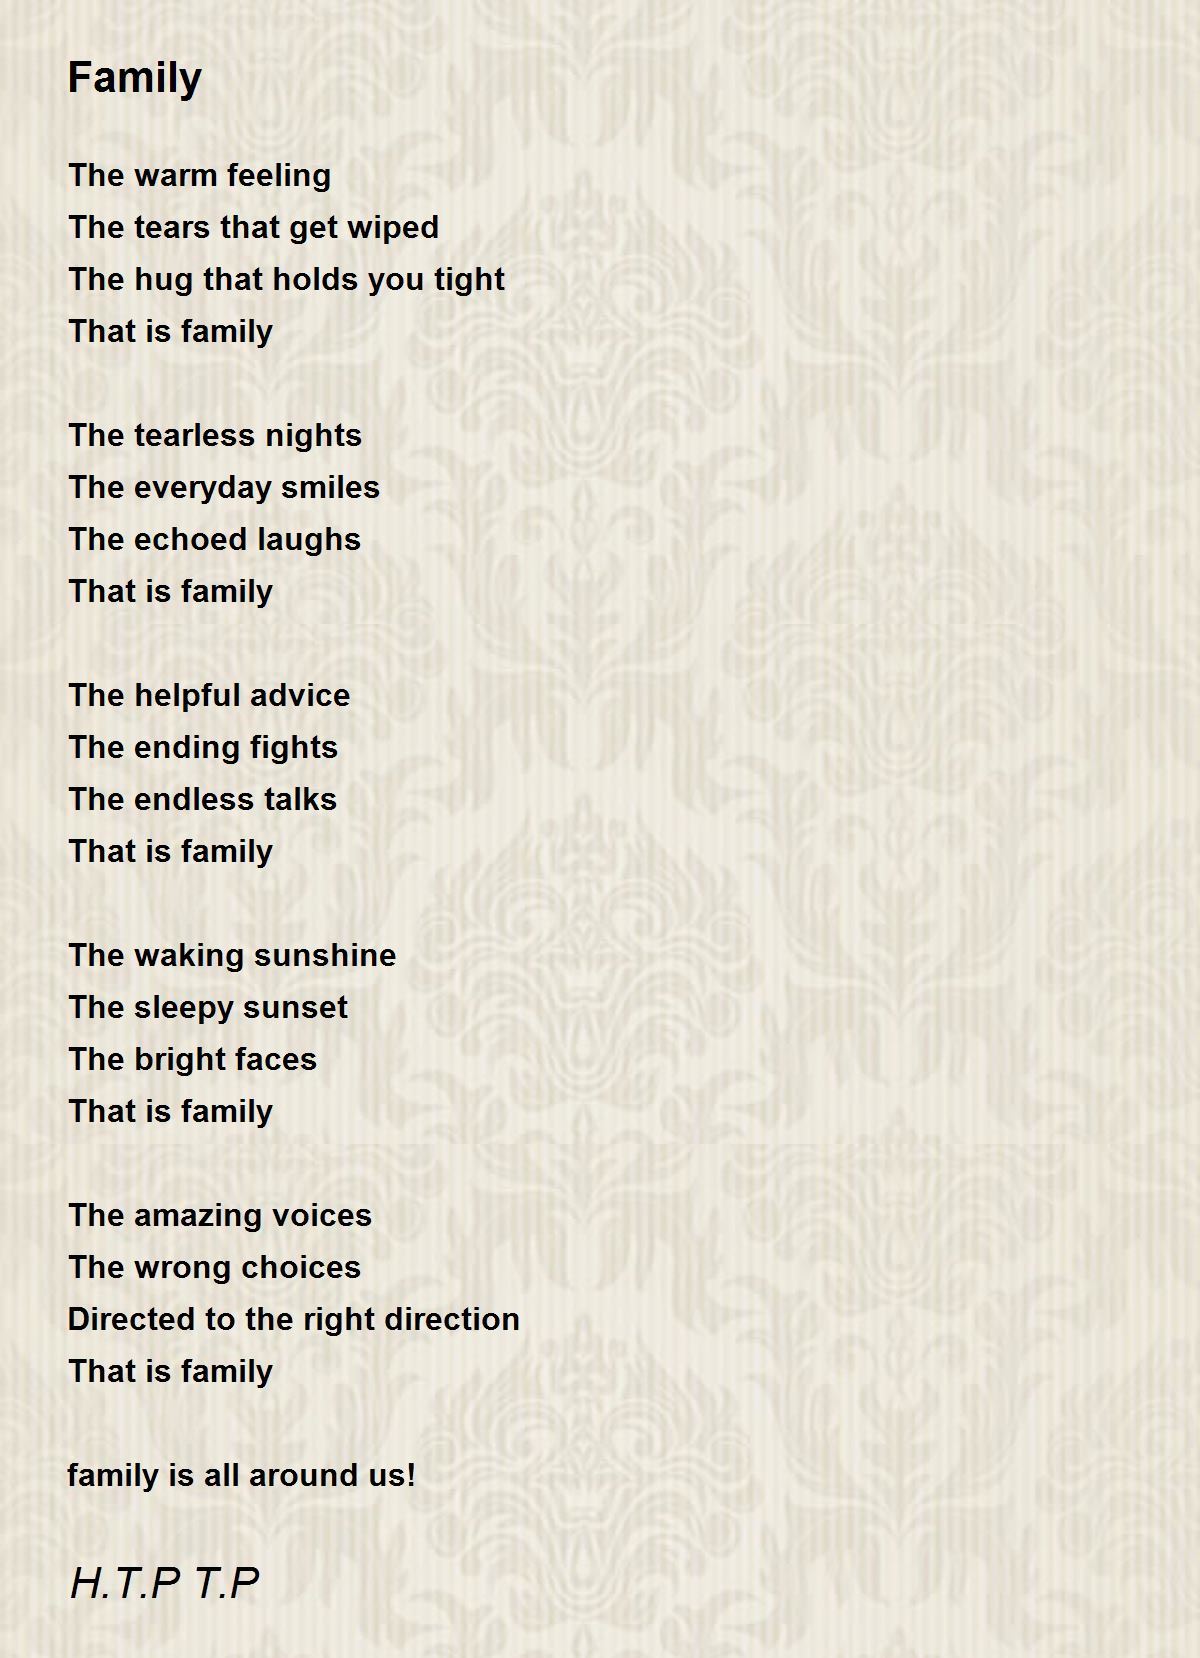 Ode Poem About Family